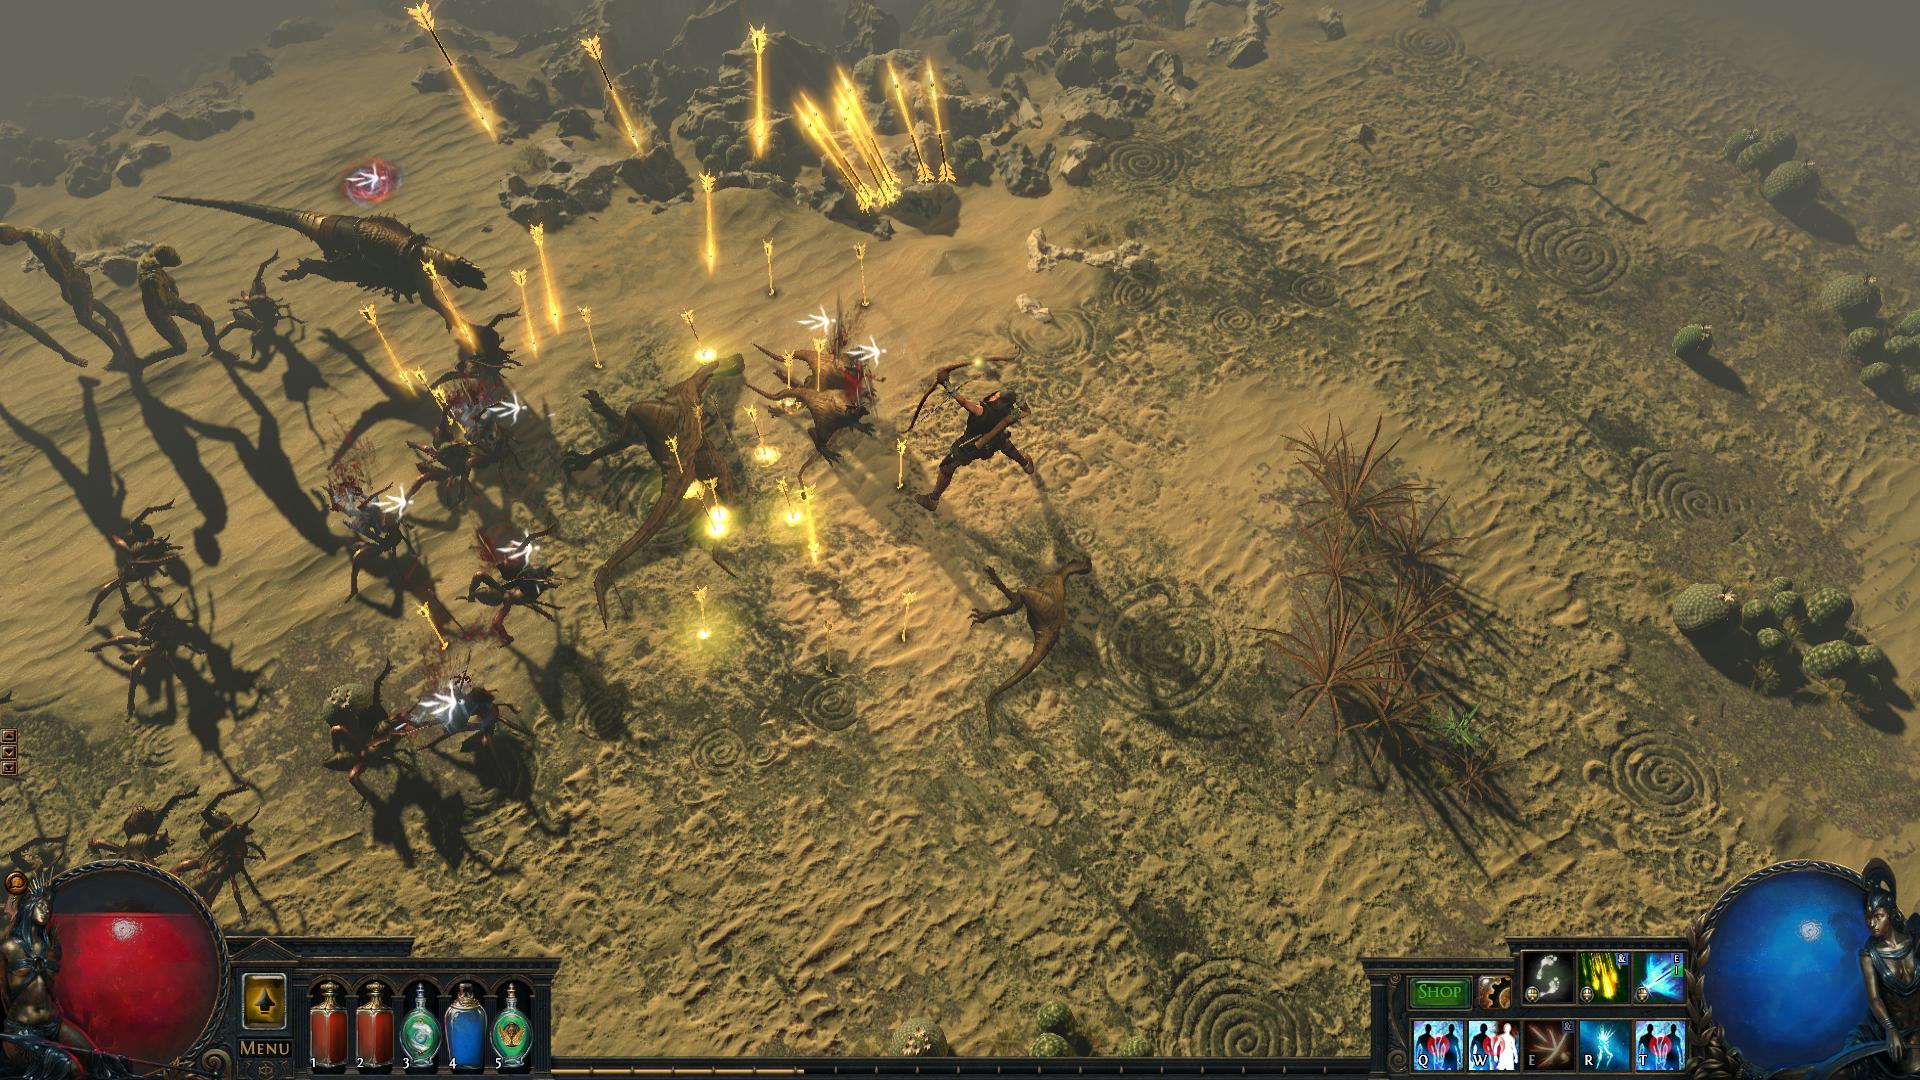 Screenshot №29 from game Path of Exile